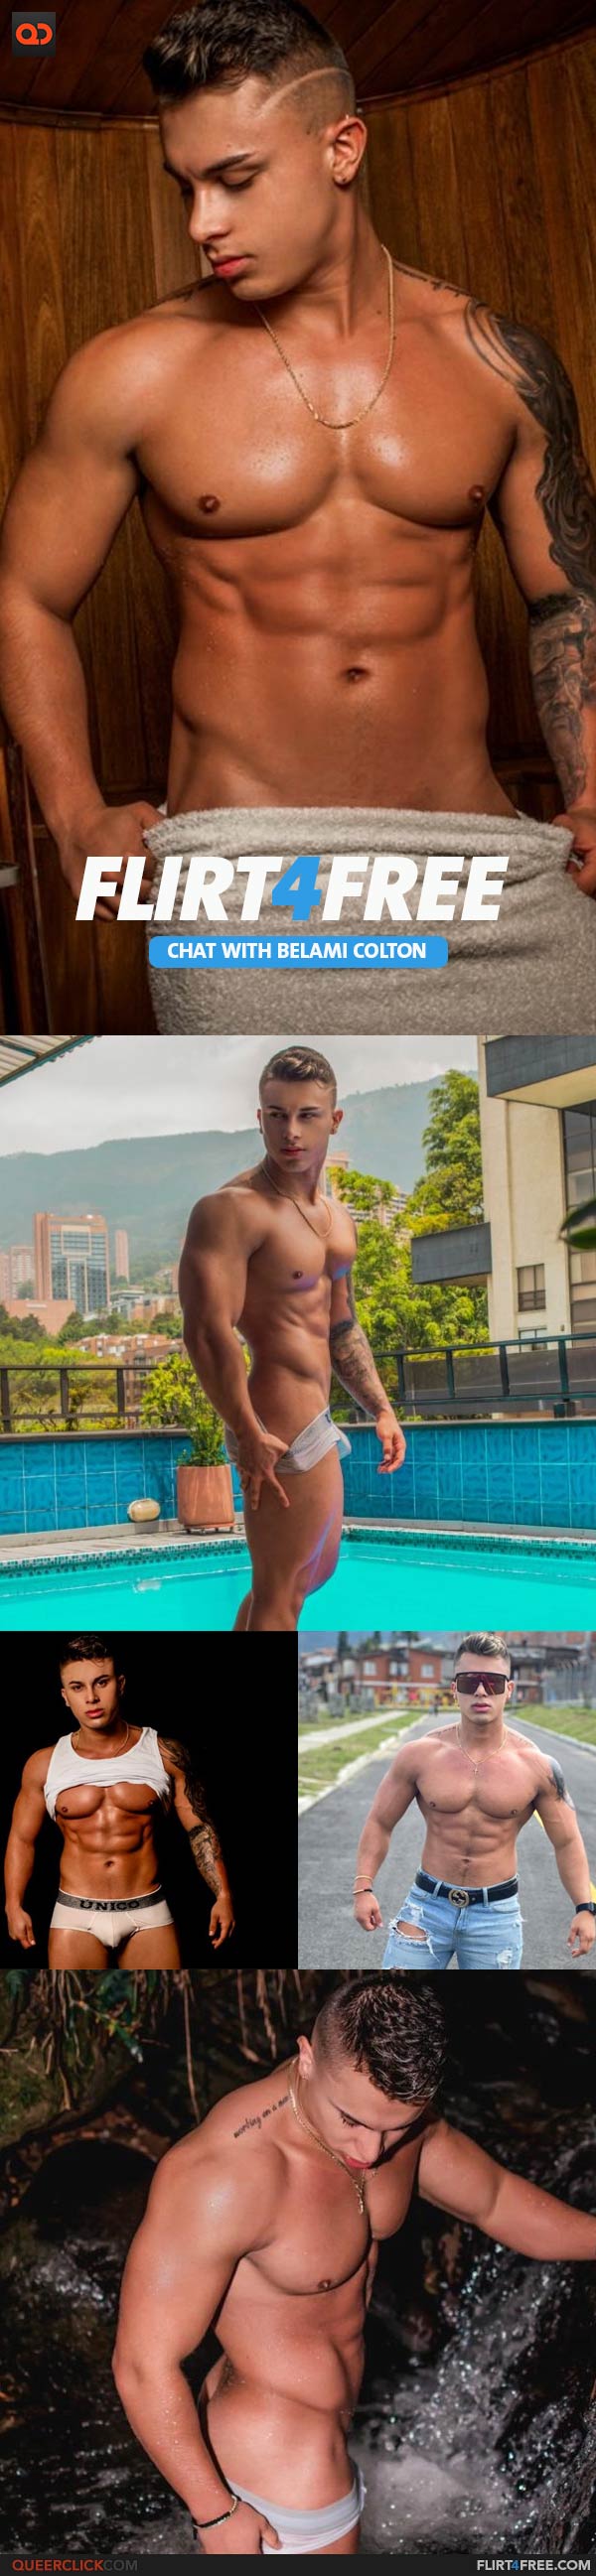 Flirt4Free: Belami Colton is Flexing and Jerking off in Fall cam Shows